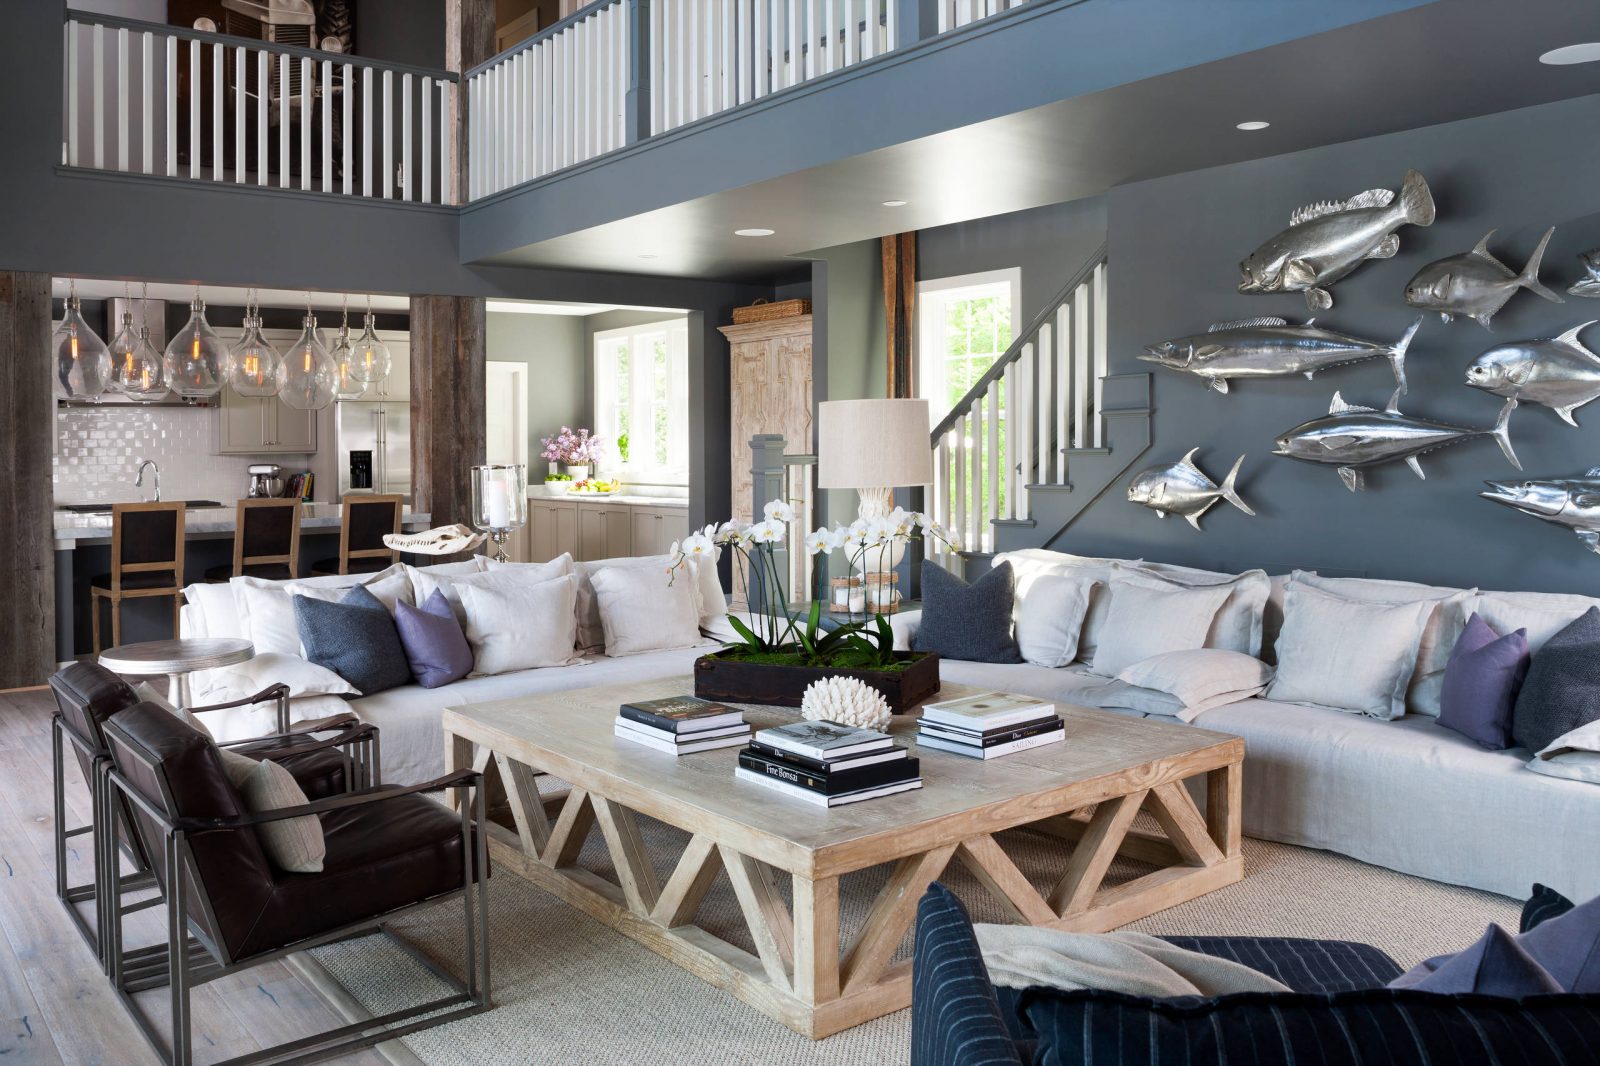 11 Most Attractive Grey and Blue Living Room Ideas That You Will Love JimenezPhoto